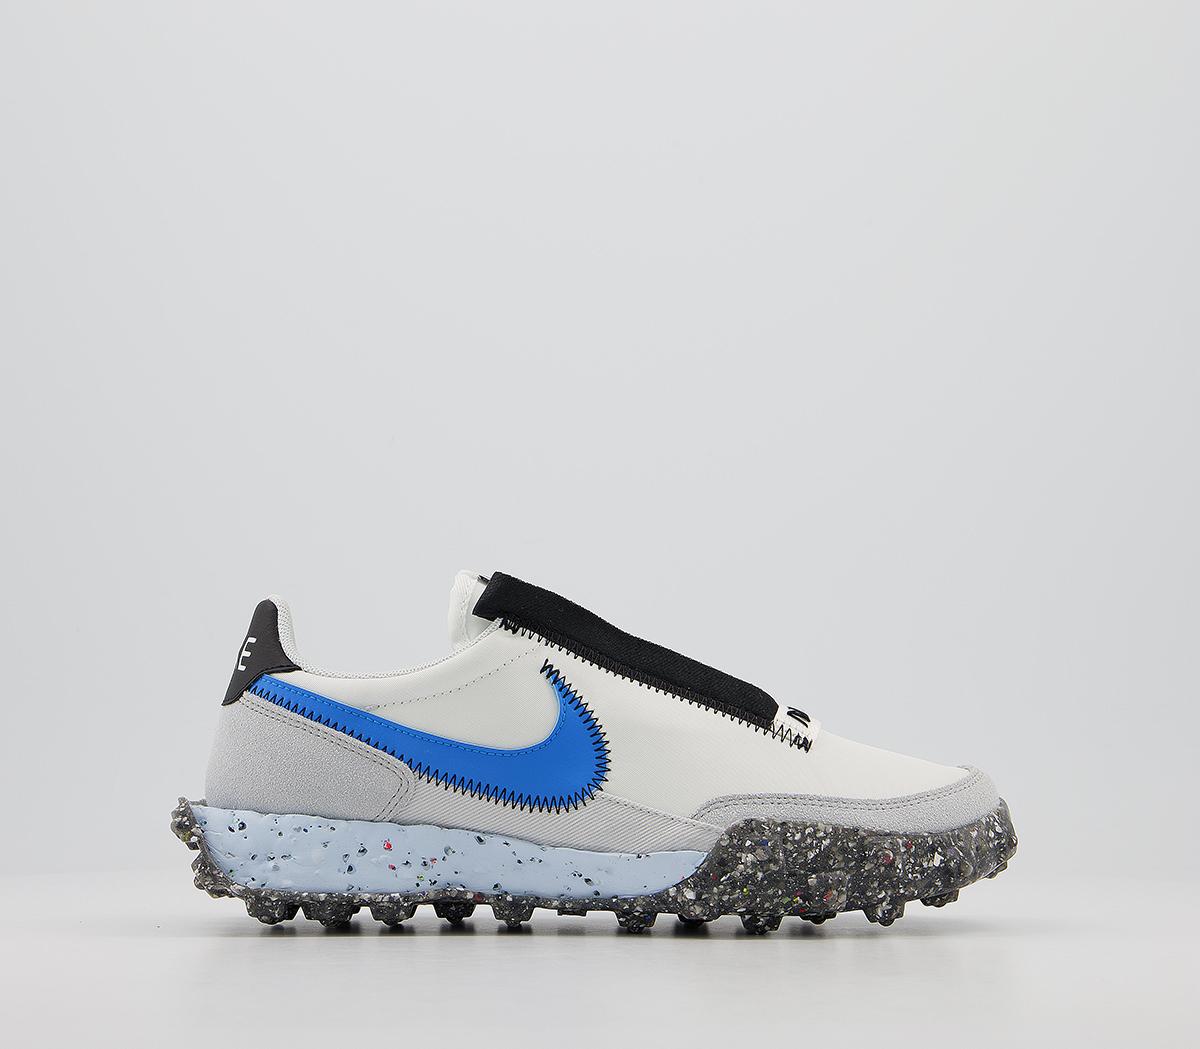 NikeWaffle Racer Crater TrainersSummit White Photo Blue Photon Dust